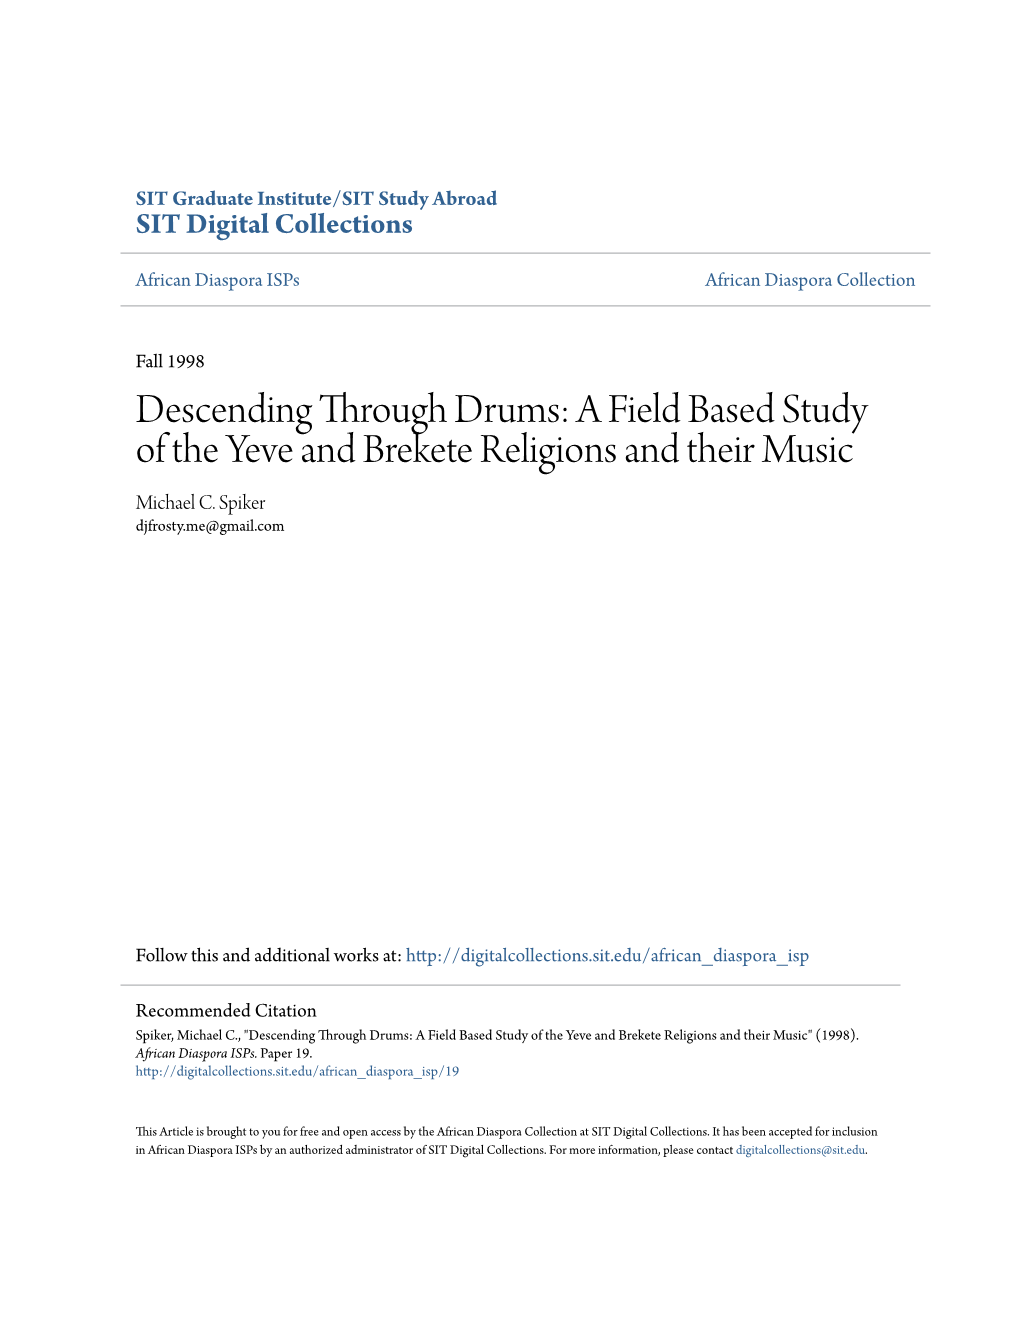 Descending Through Drums: a Field Based Study of the Yeve and Brekete Religions and Their Music Michael C